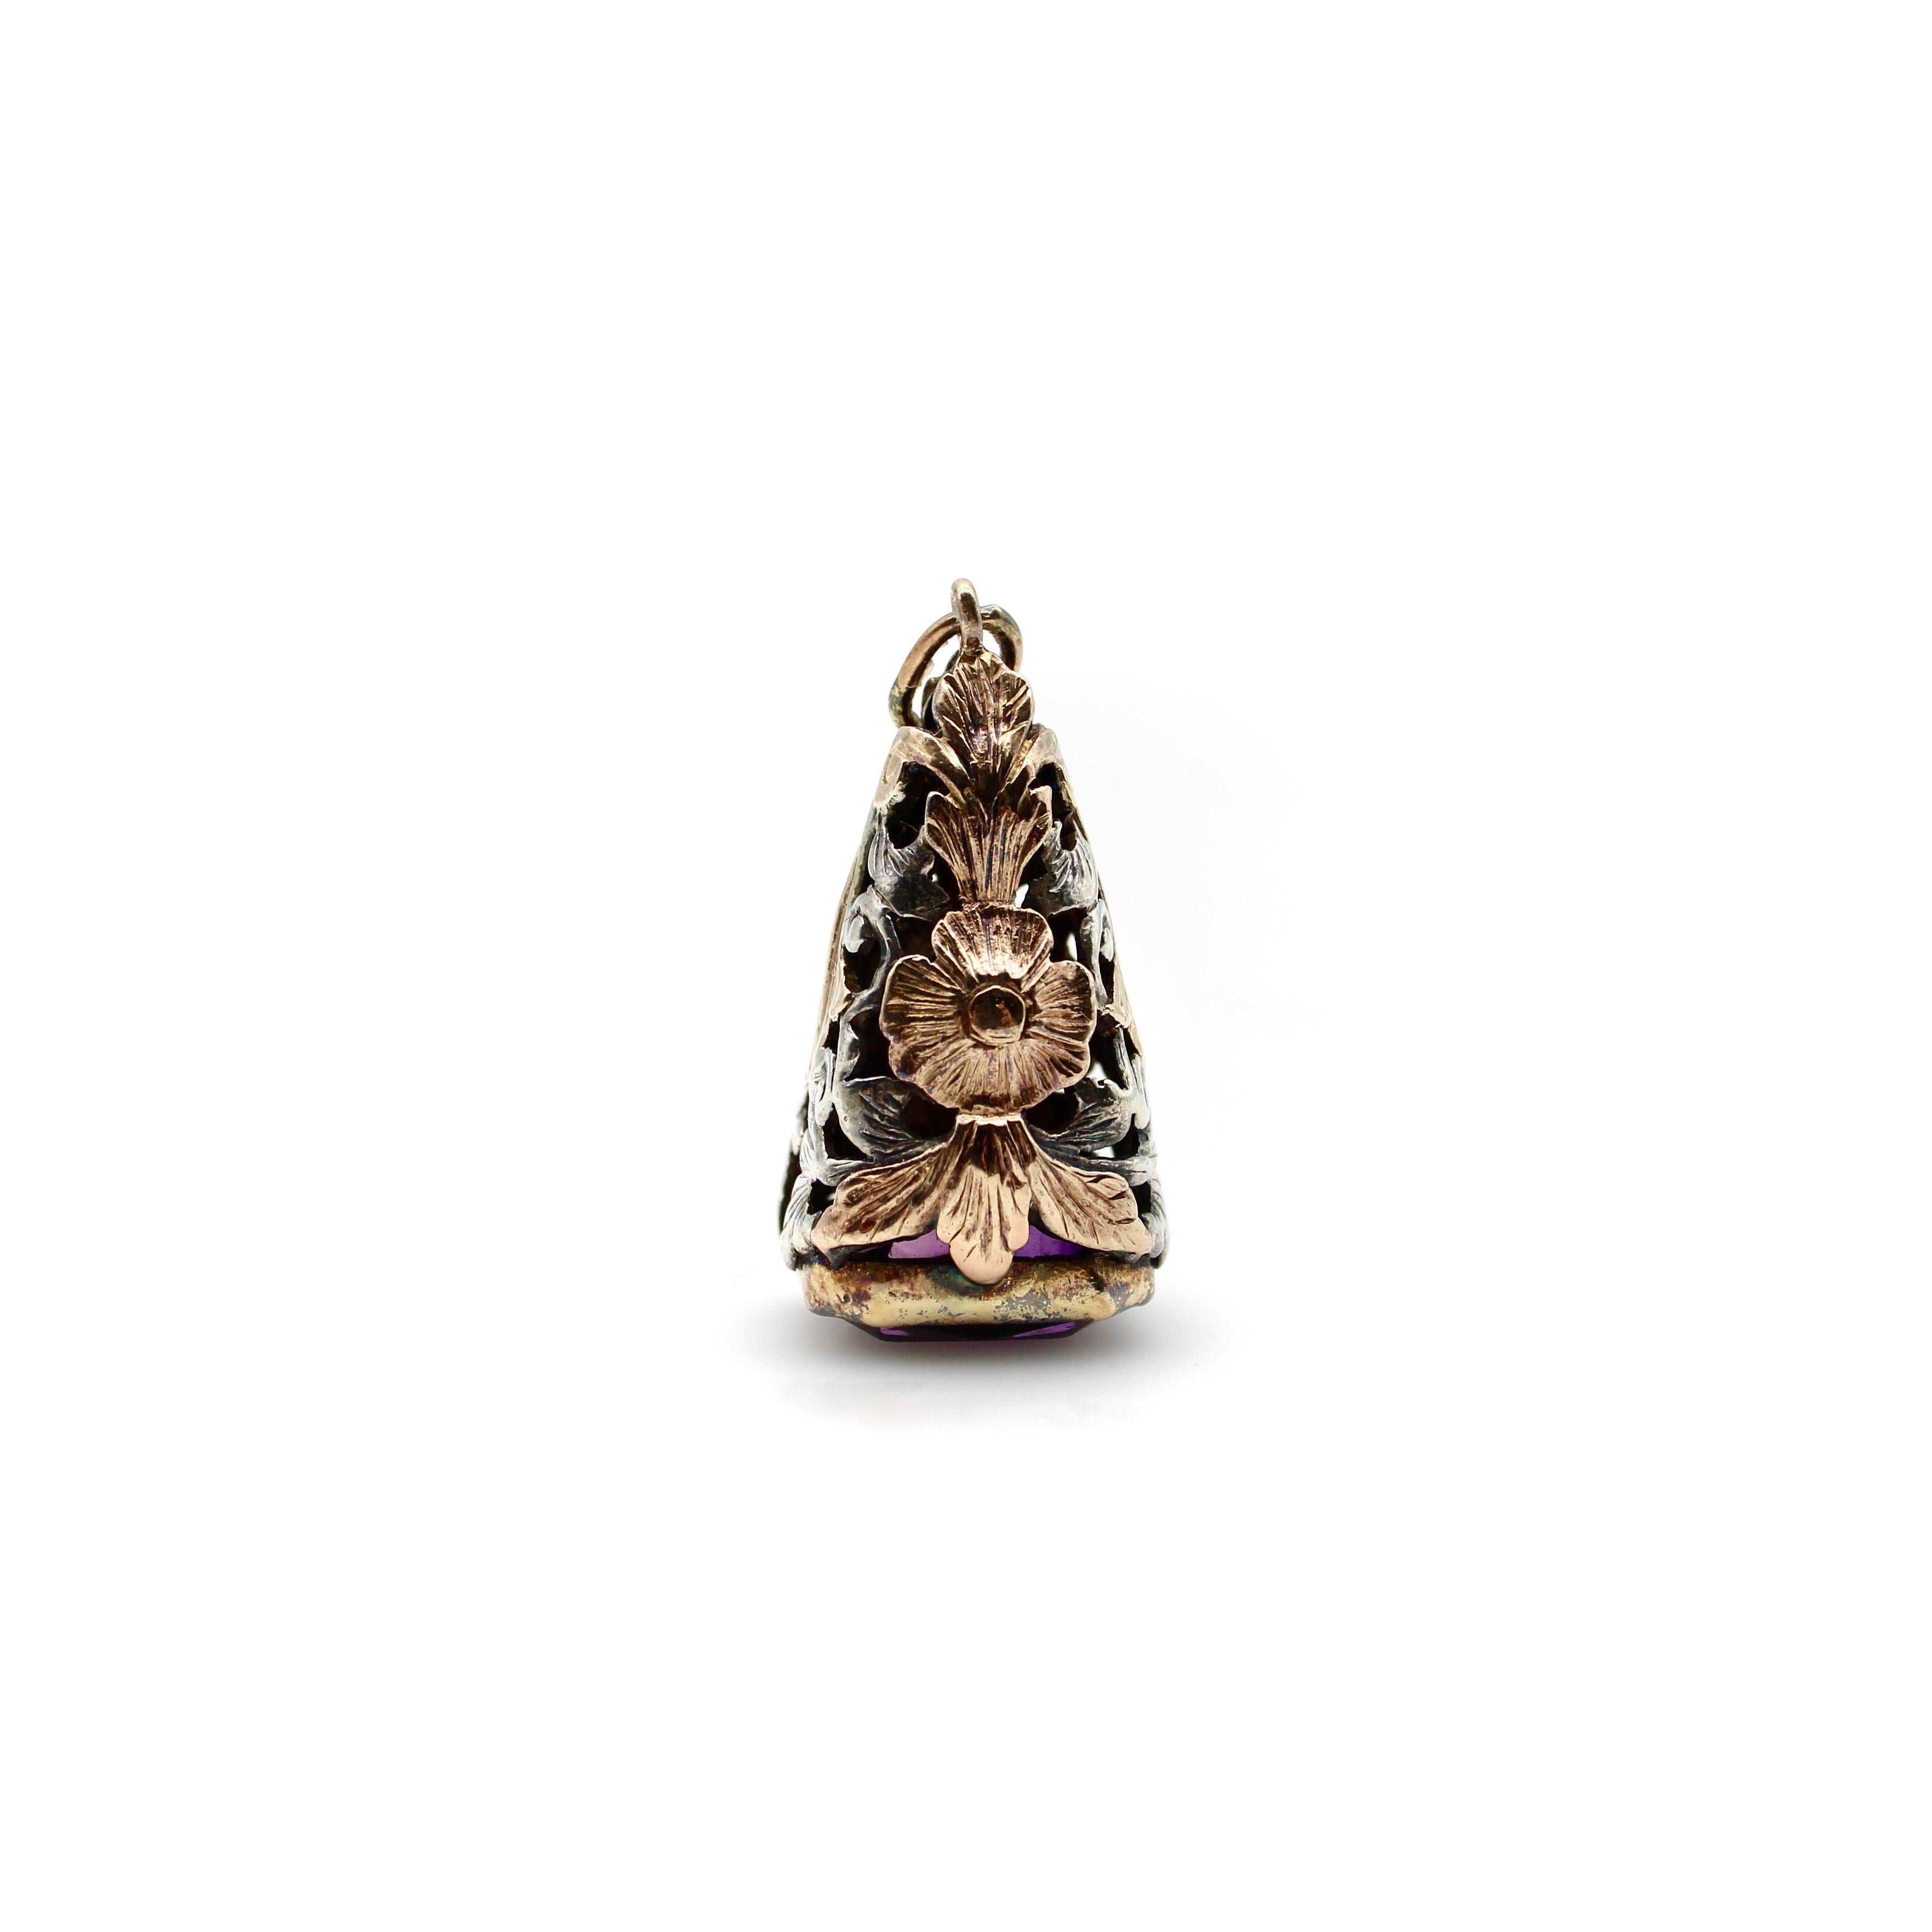 This mixed-metal piece combines 14k rose gold and silver in the beautiful floral and foliate motif of an open work cone. A rose gold flower dangles in silhouette, surrounded by a frame of silver leaves. At the bottom is a deep purple amethyst,